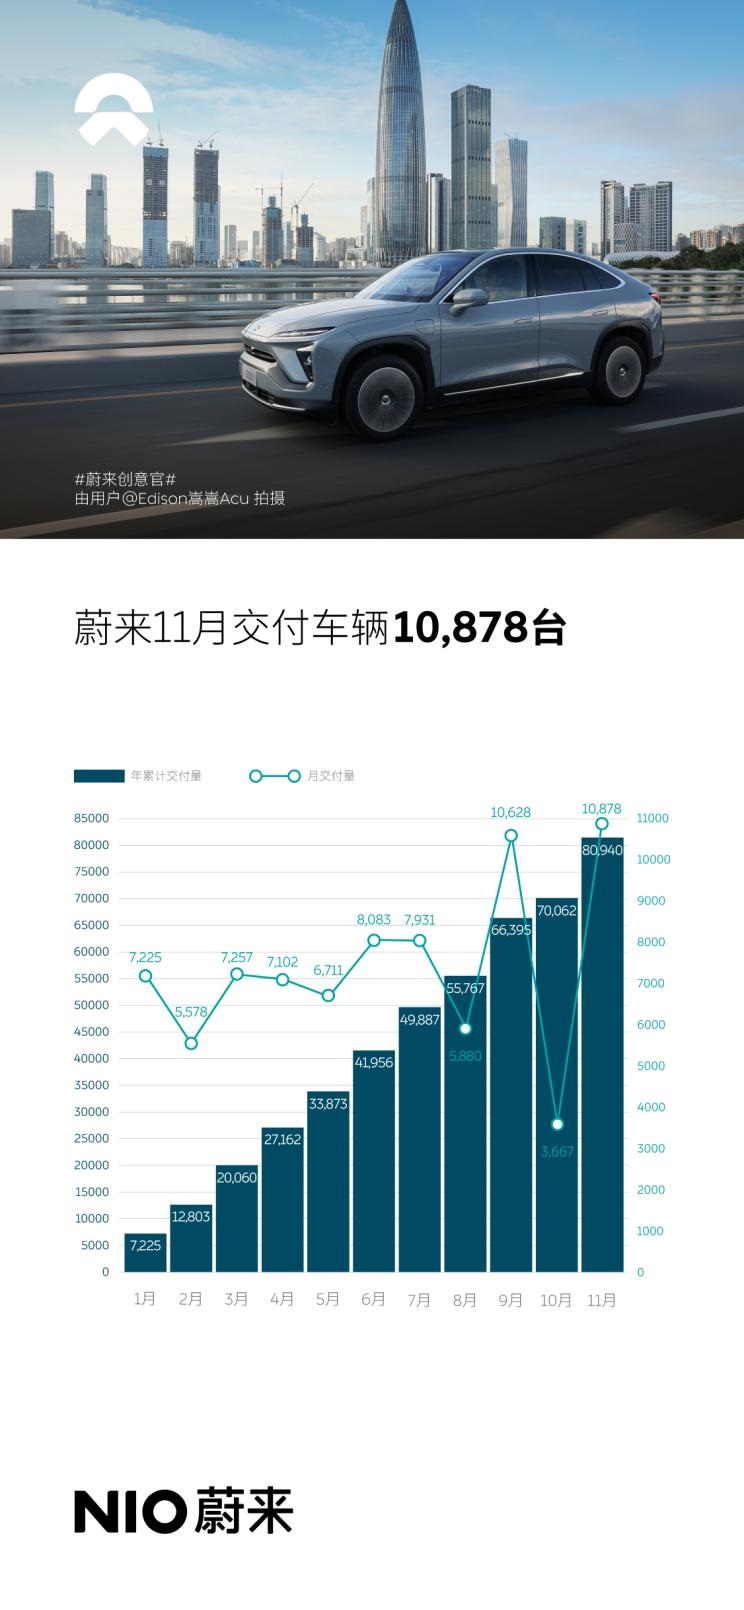 NIO delivered 10,878 vehicles in November, A year-on-year increase of 105.6%